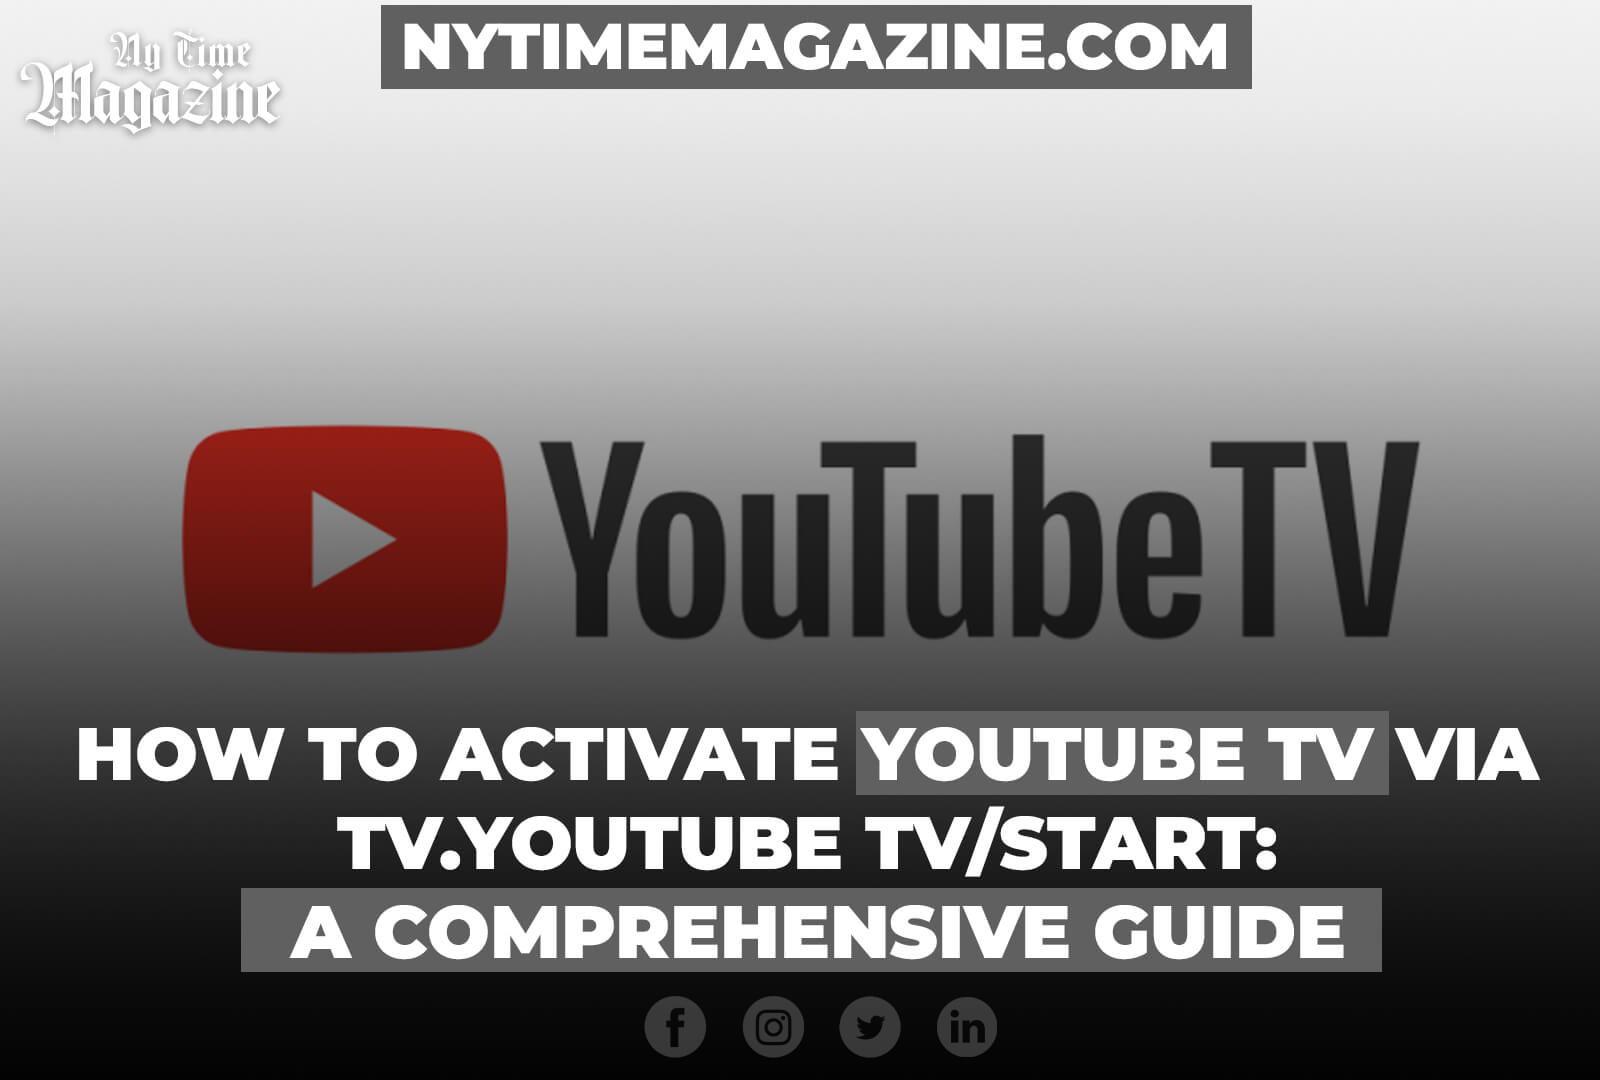 HOW TO ACTIVATE YOUTUBE TV VIA TV.YOUTUBE TV/START: A COMPREHENSIVE GUIDE